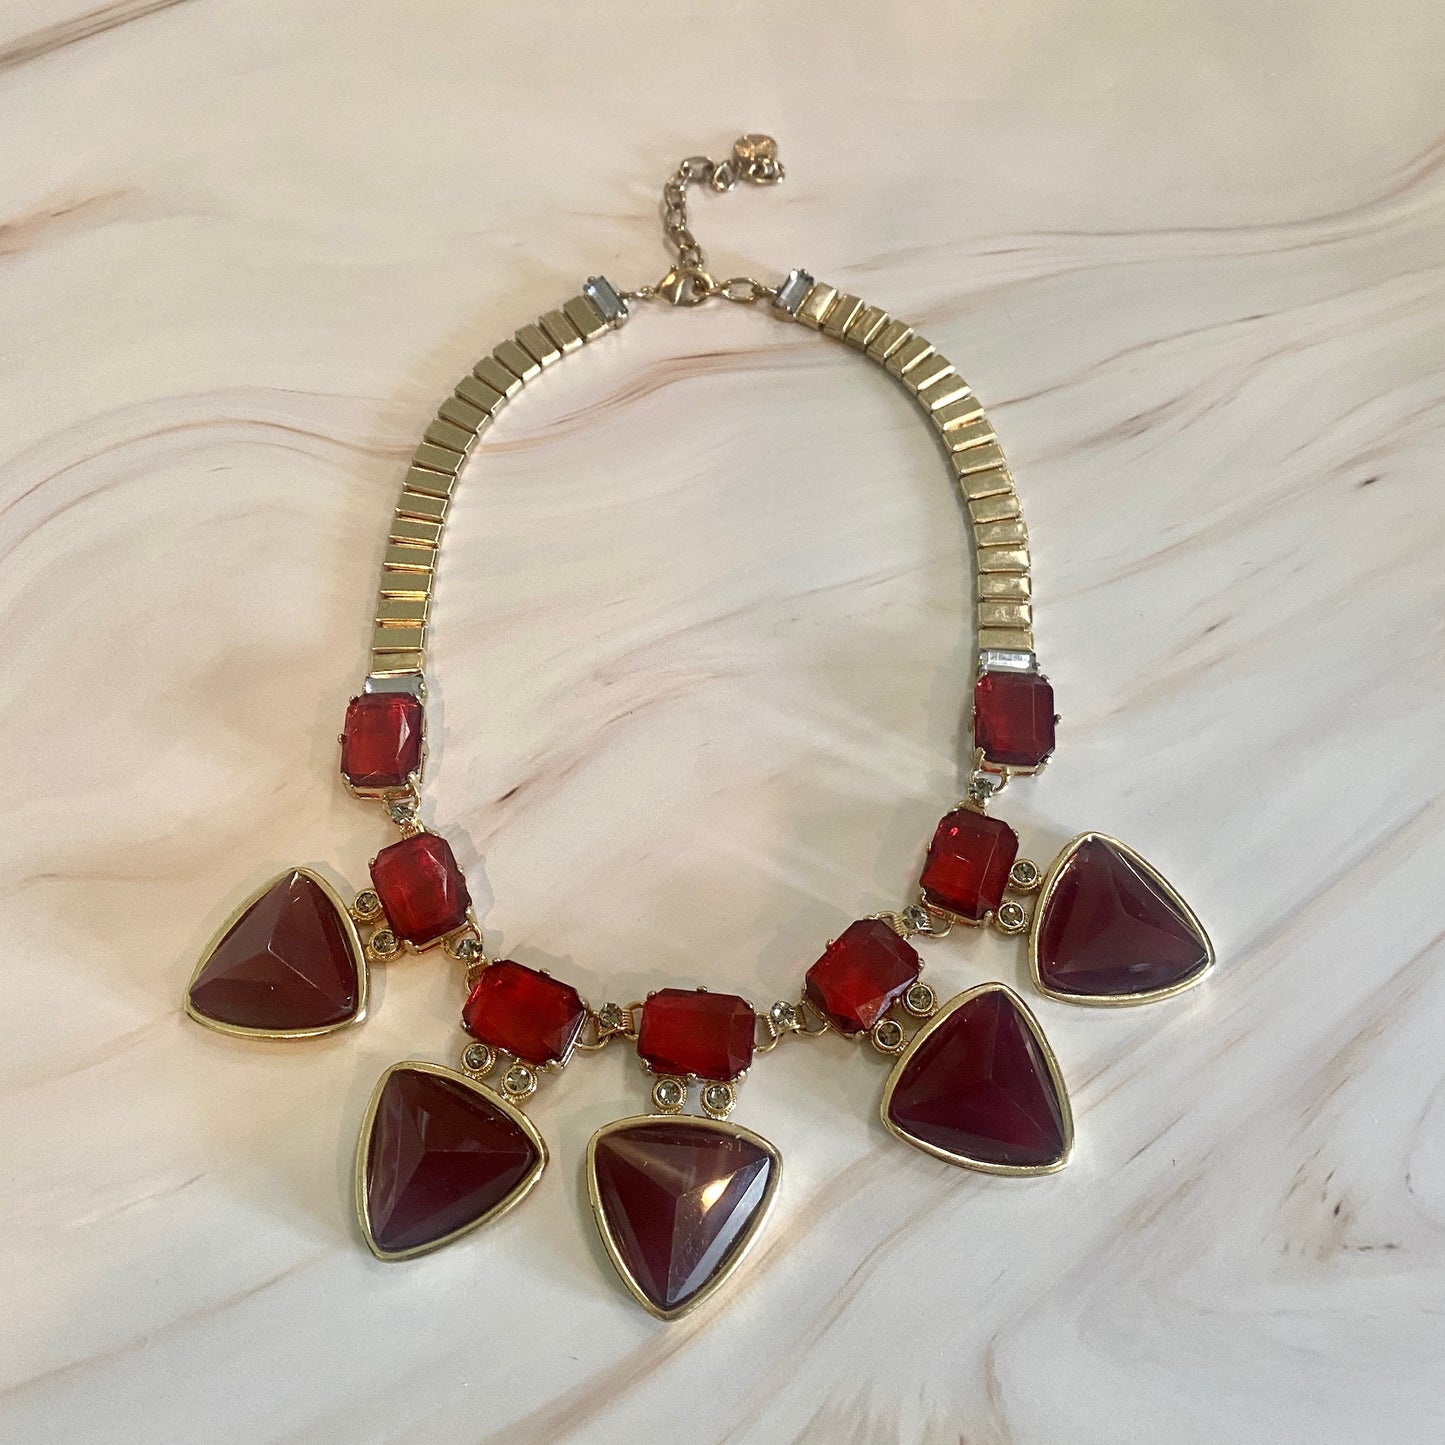 Queen of Hearts Graziano  Red Jeweled Statement Necklace